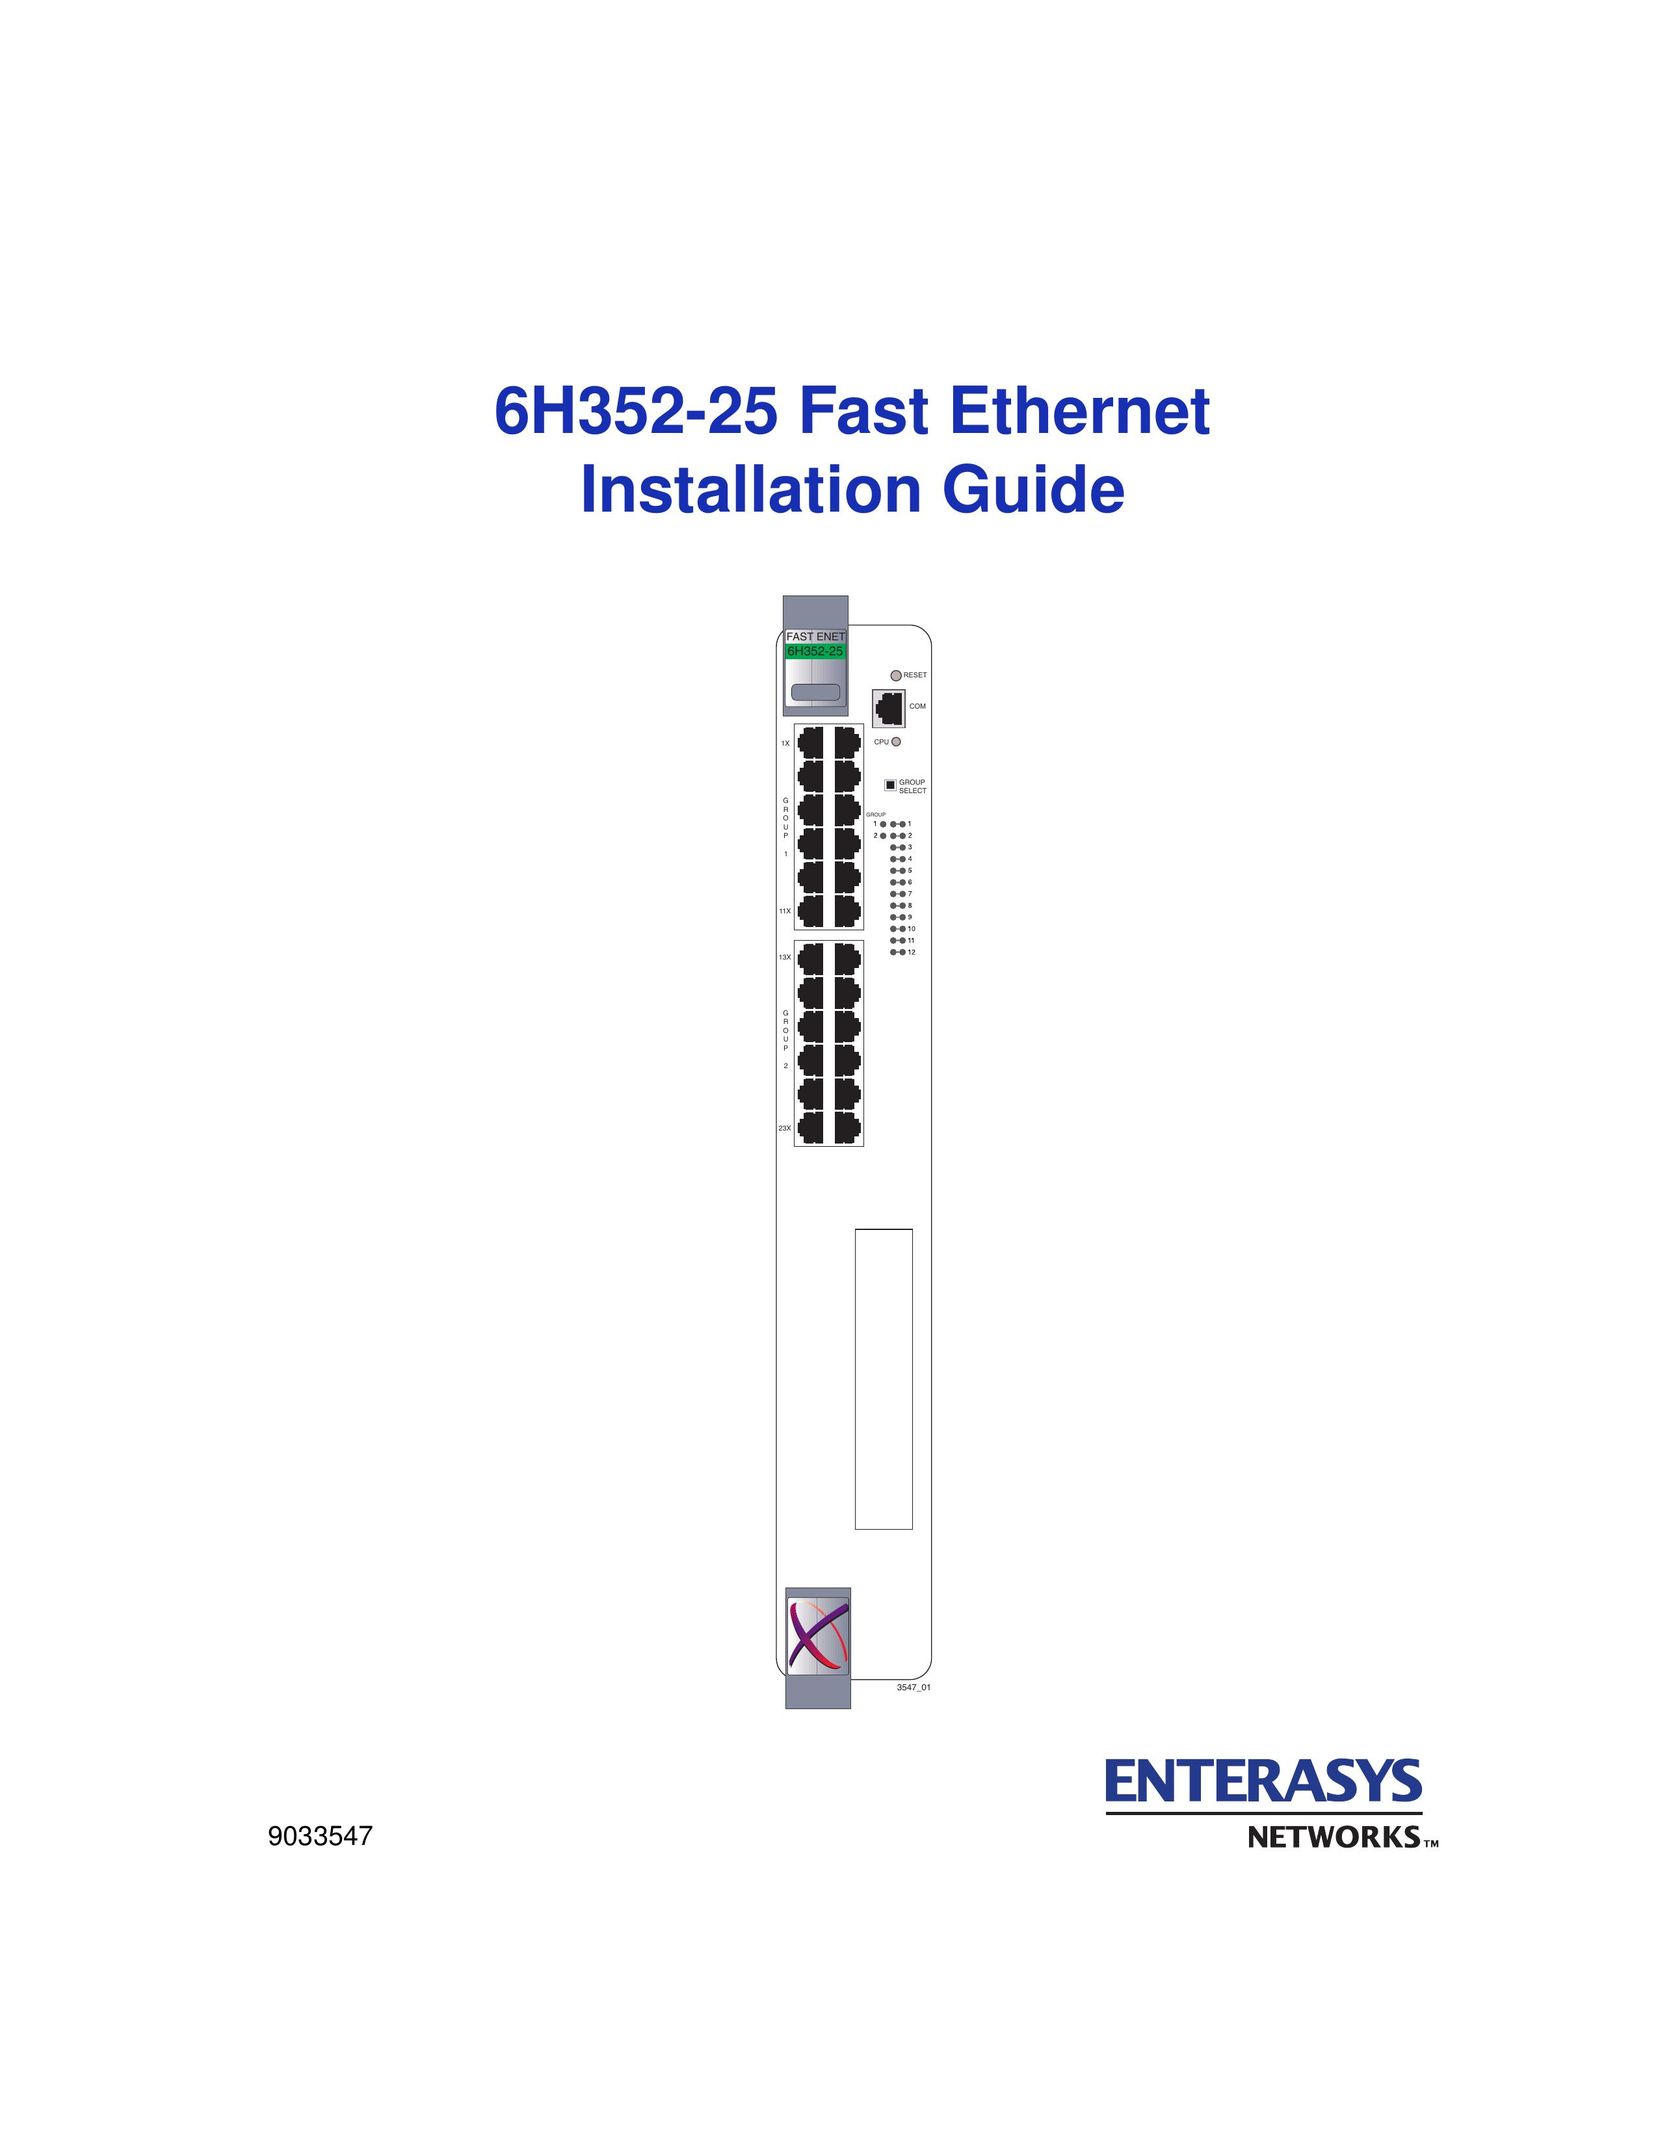 Enterasys Networks 6H352-25 Switch User Manual